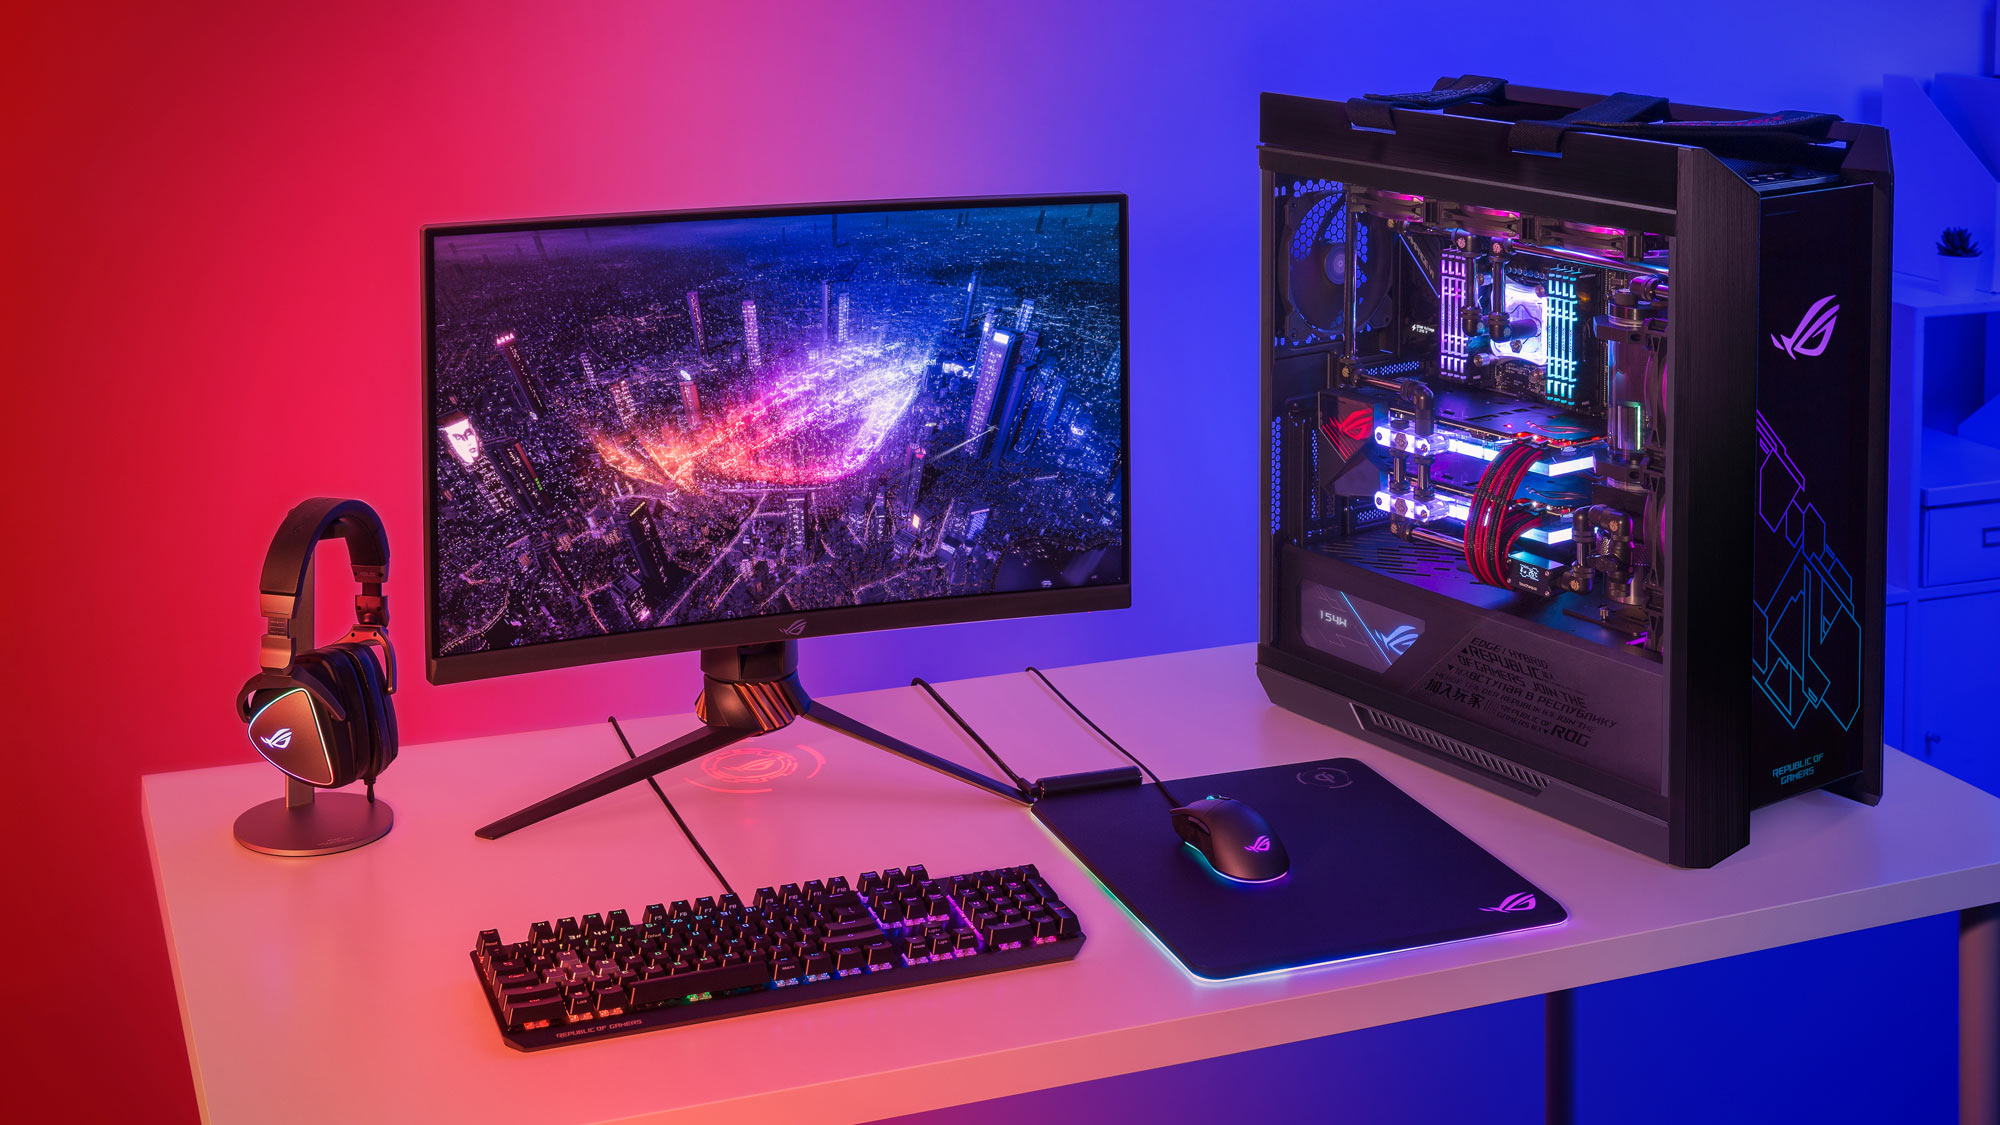 How to optimise your PC for gaming